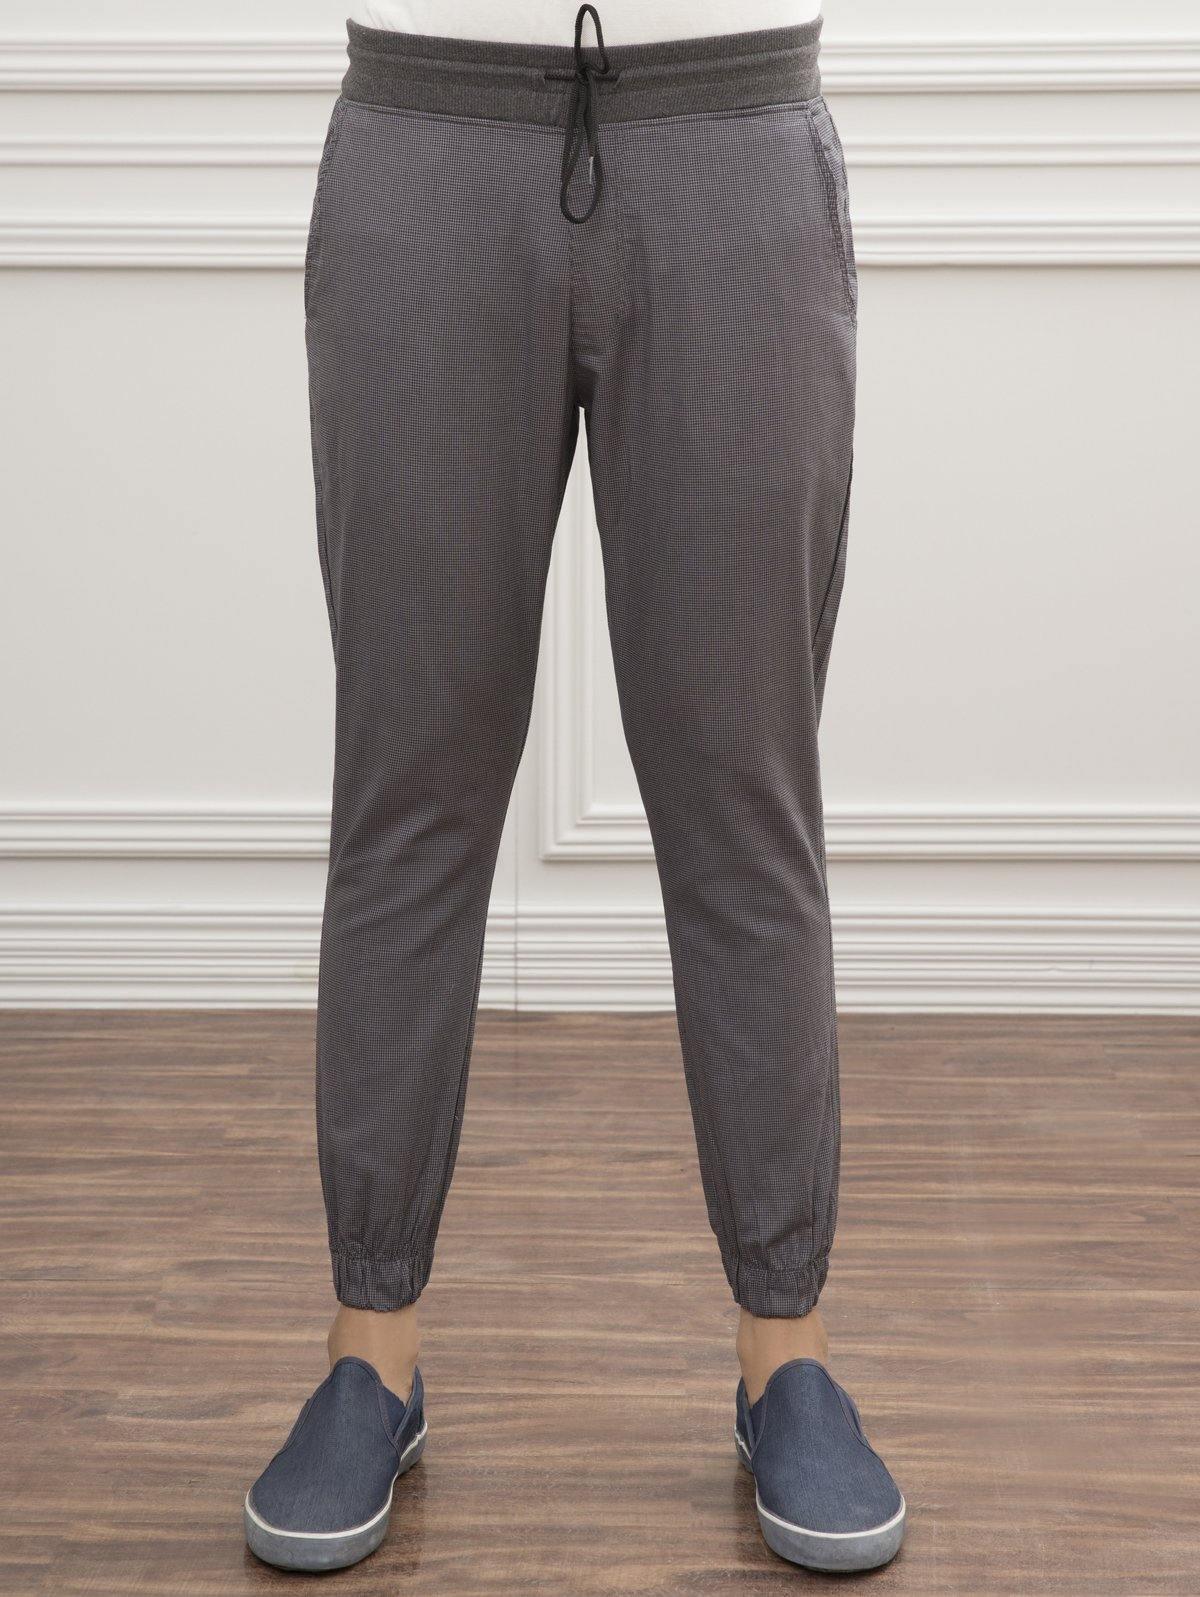 SELF CHECK SLIM FIT TROUSER GREY BLACK at Charcoal Clothing